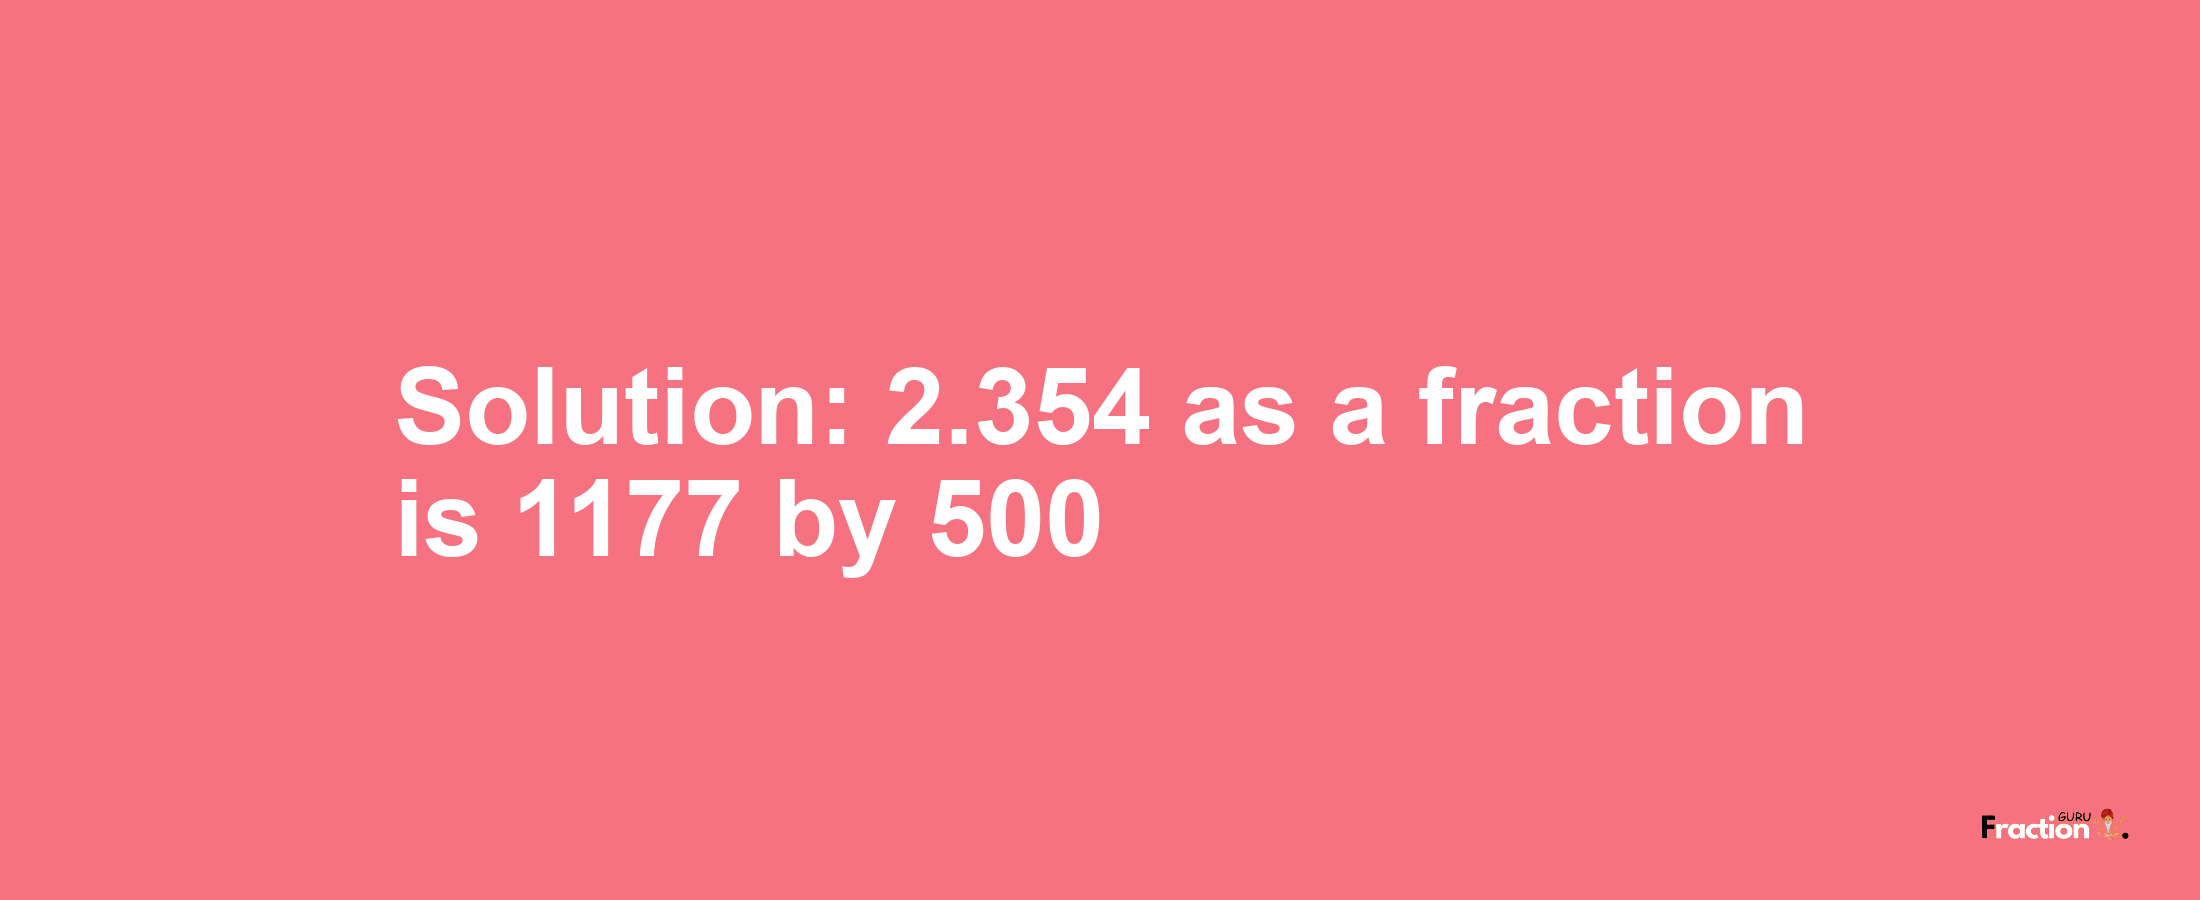 Solution:2.354 as a fraction is 1177/500